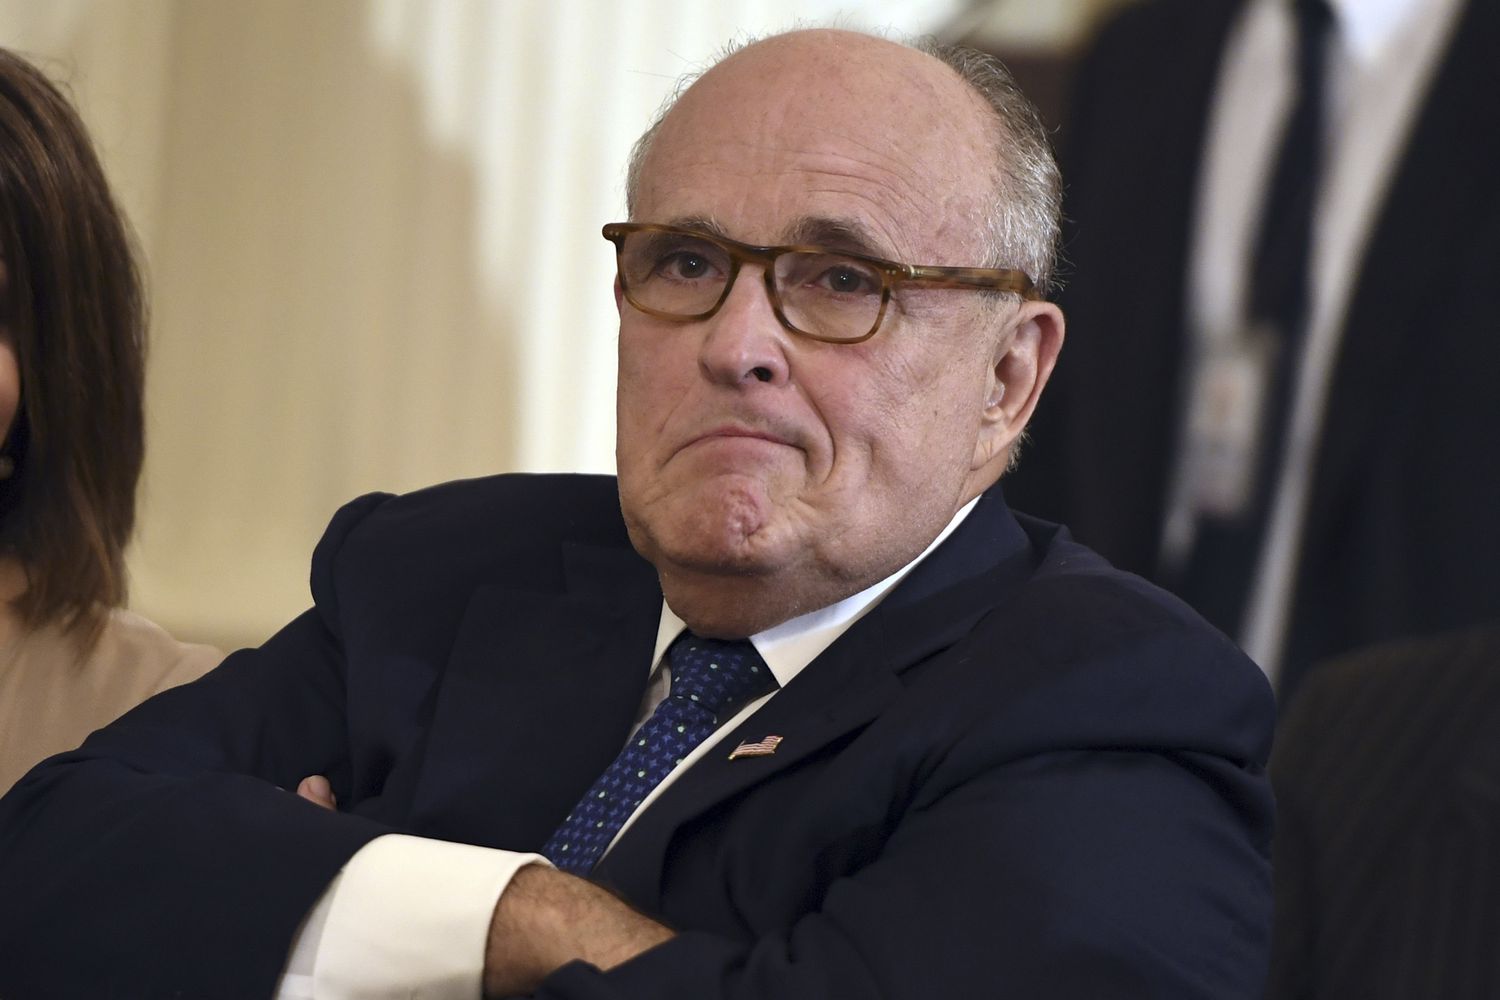 Rudy Giuliani Makes a Cameo Video Opposing Former Client | PEOPLE.com